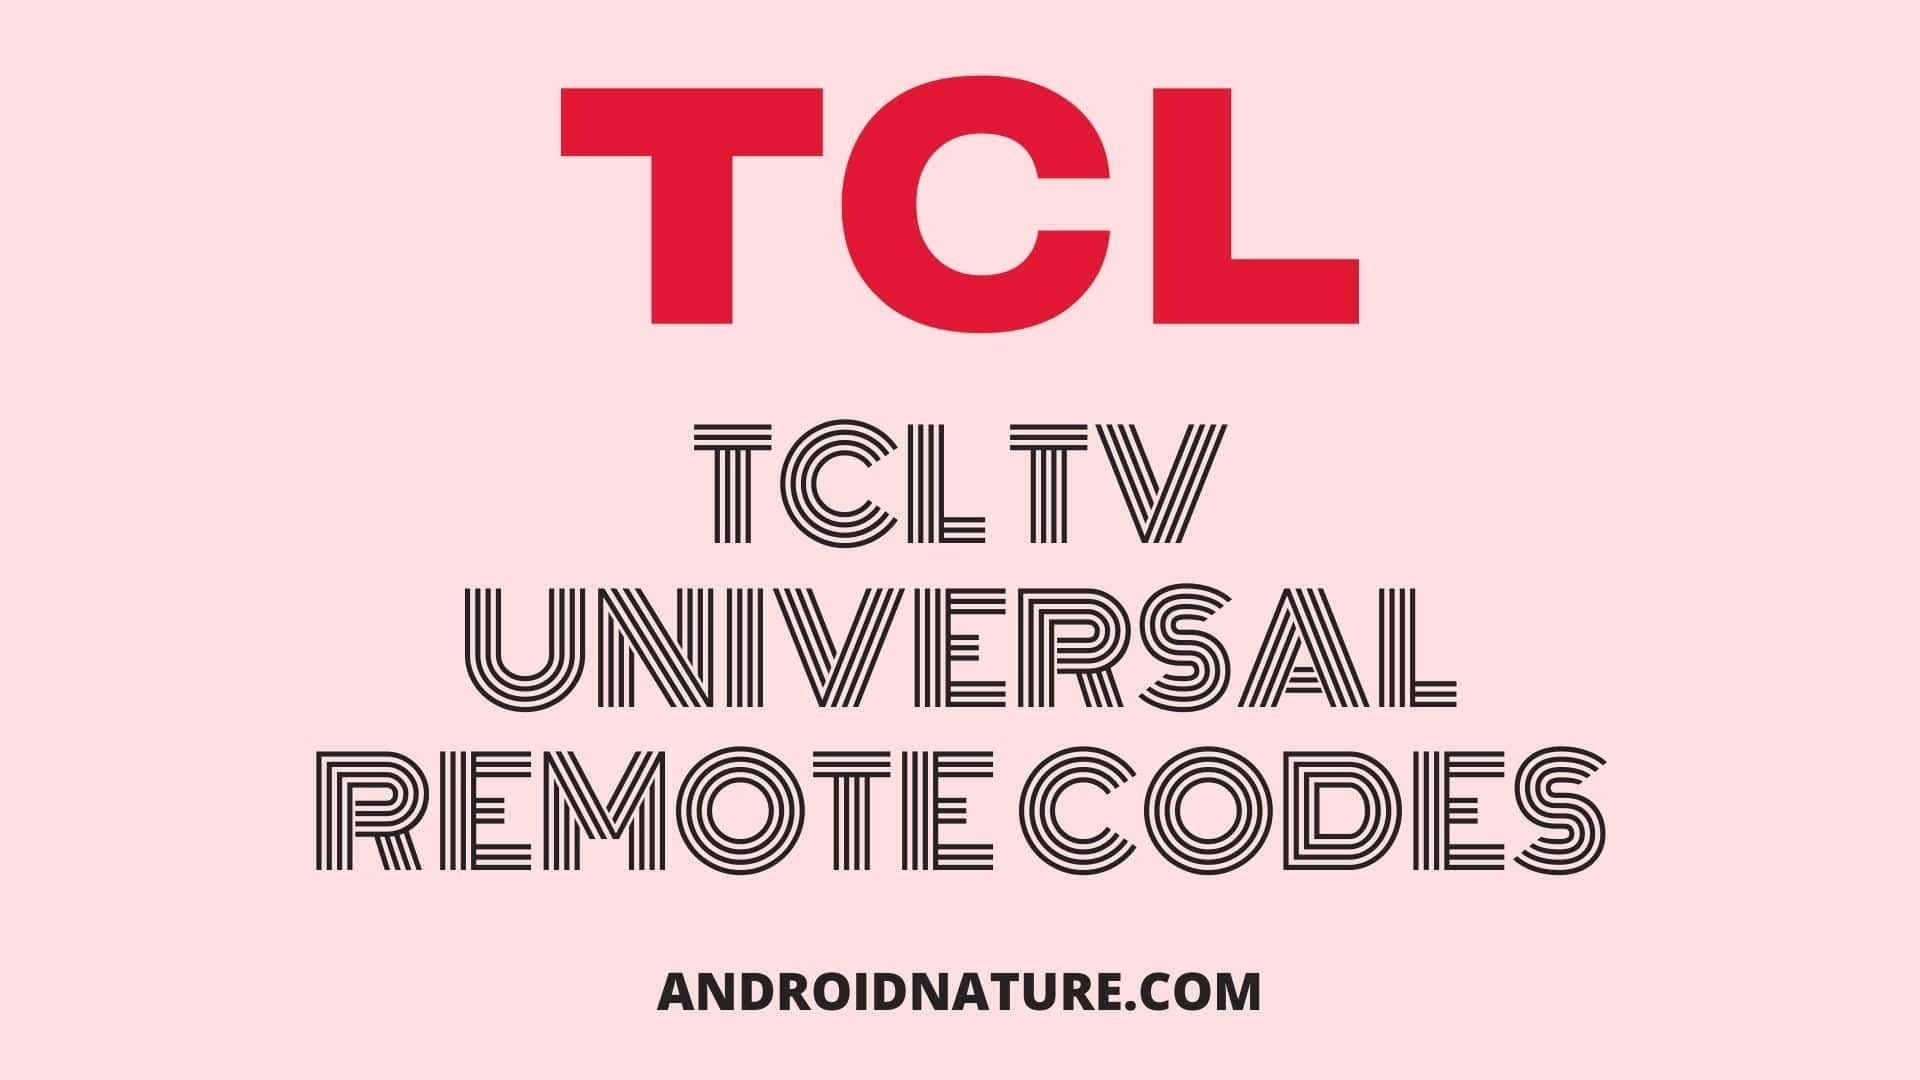 TCL TV universal remote codes